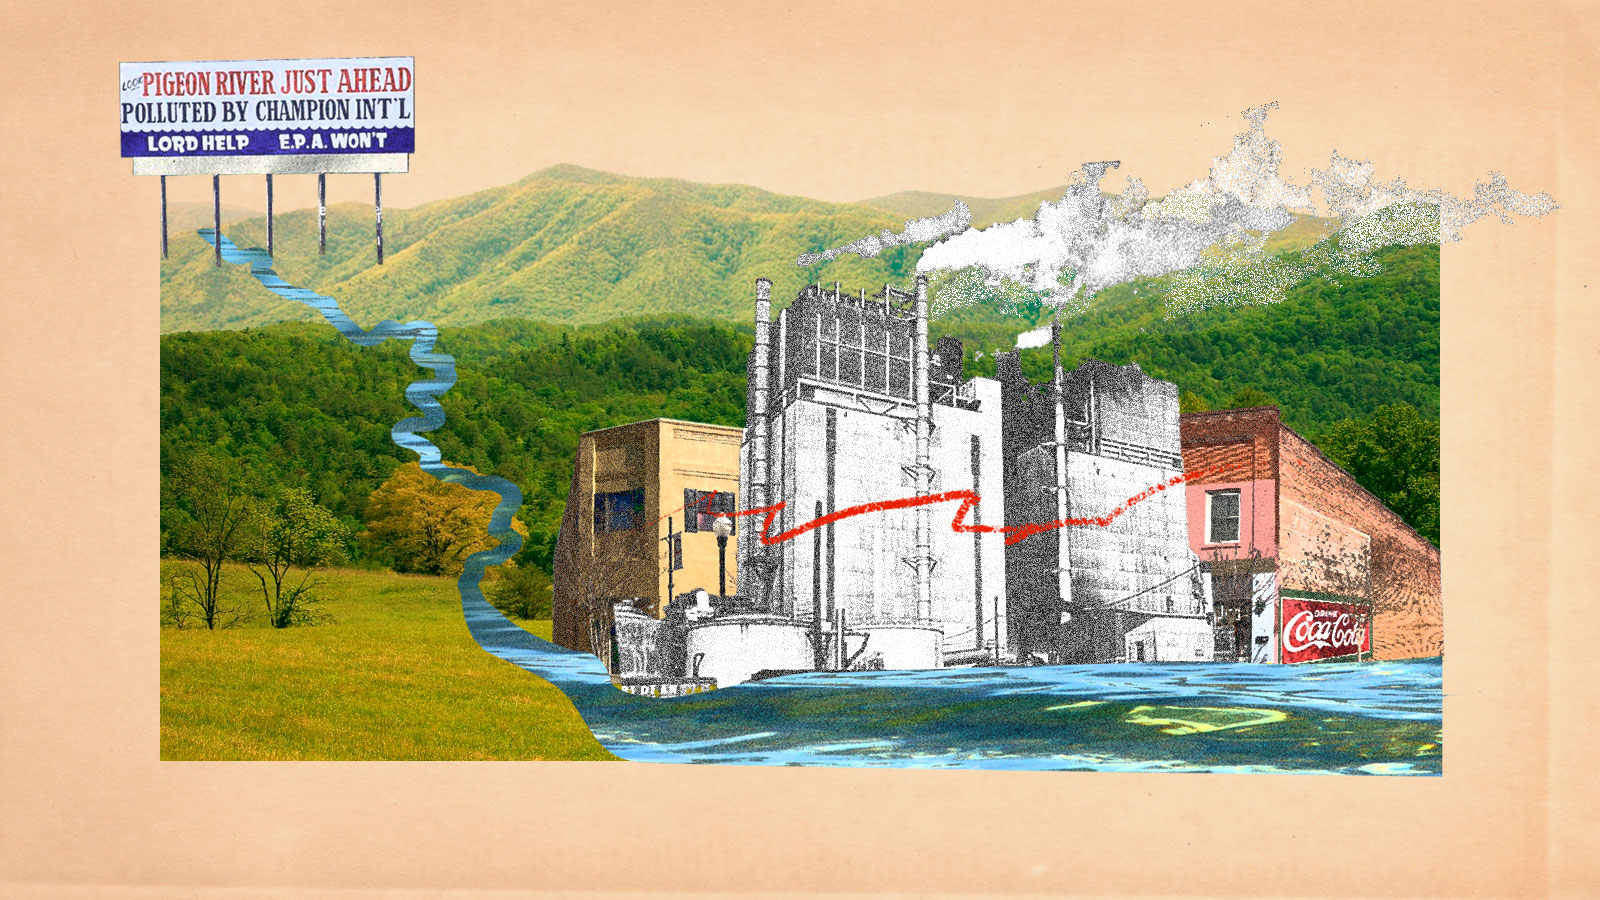 digital collage of paper mill and buildings with river and billboard set against background of mountains